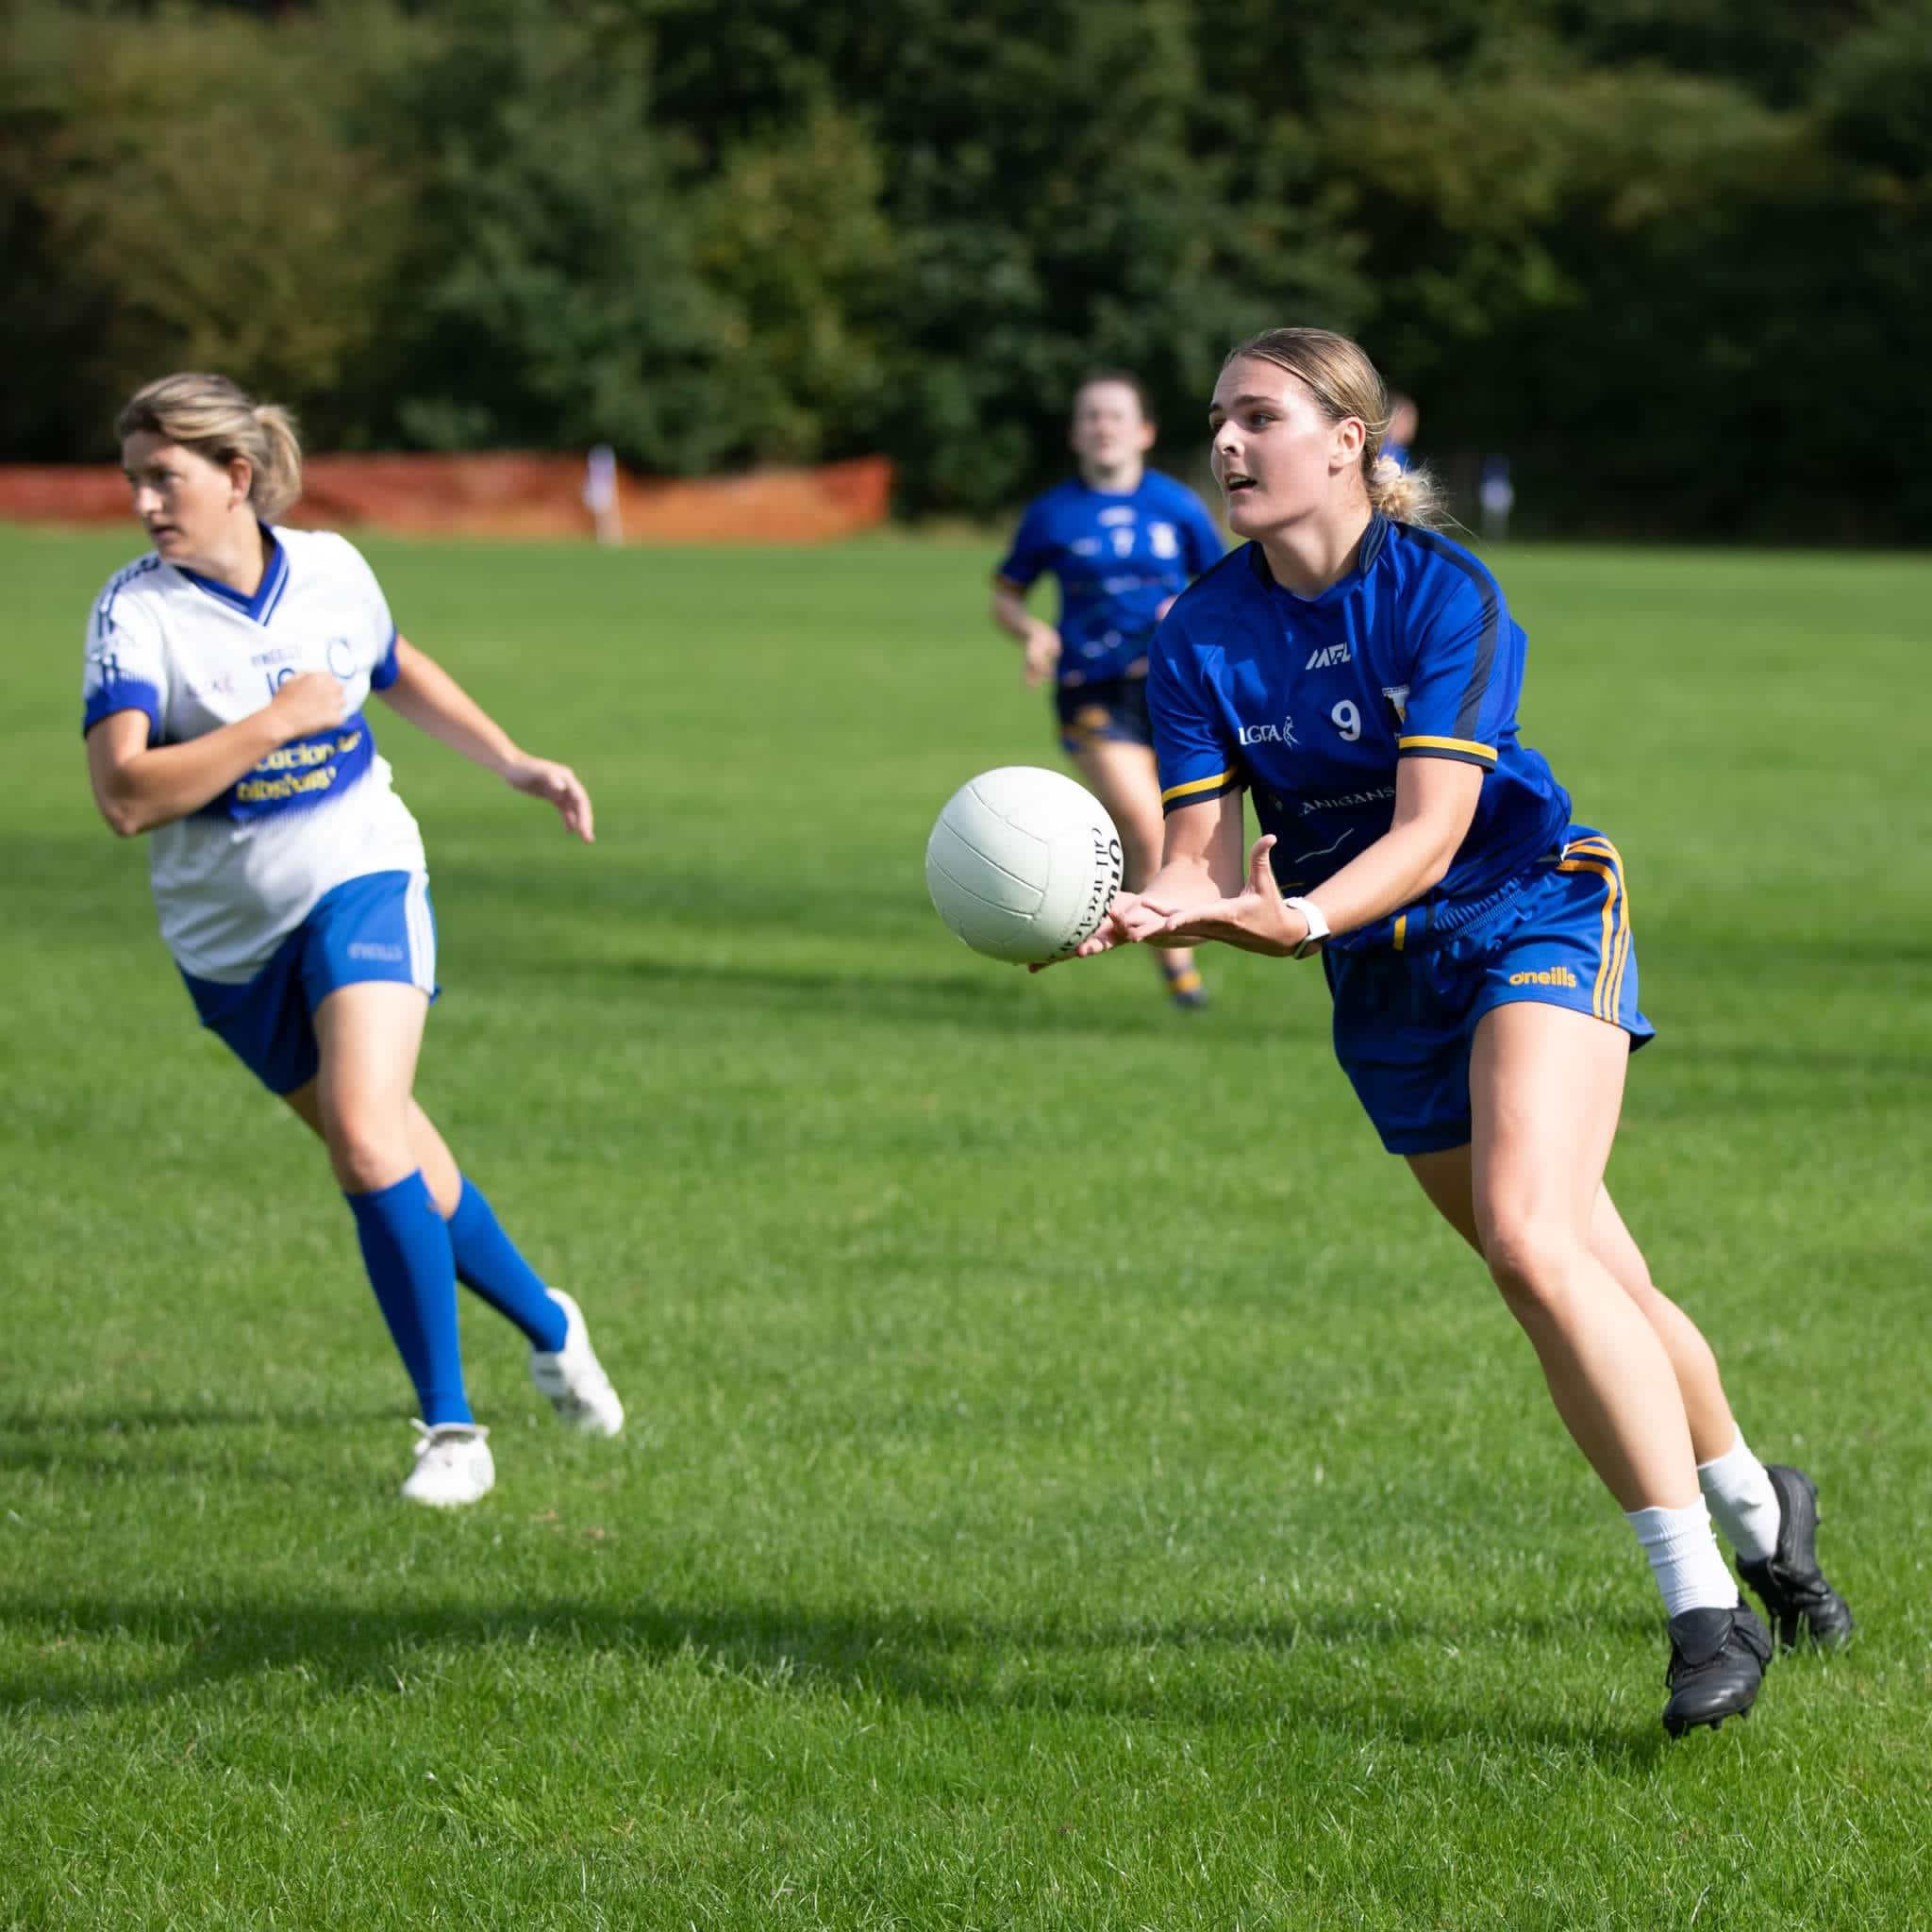 Female Gaelic football player in action